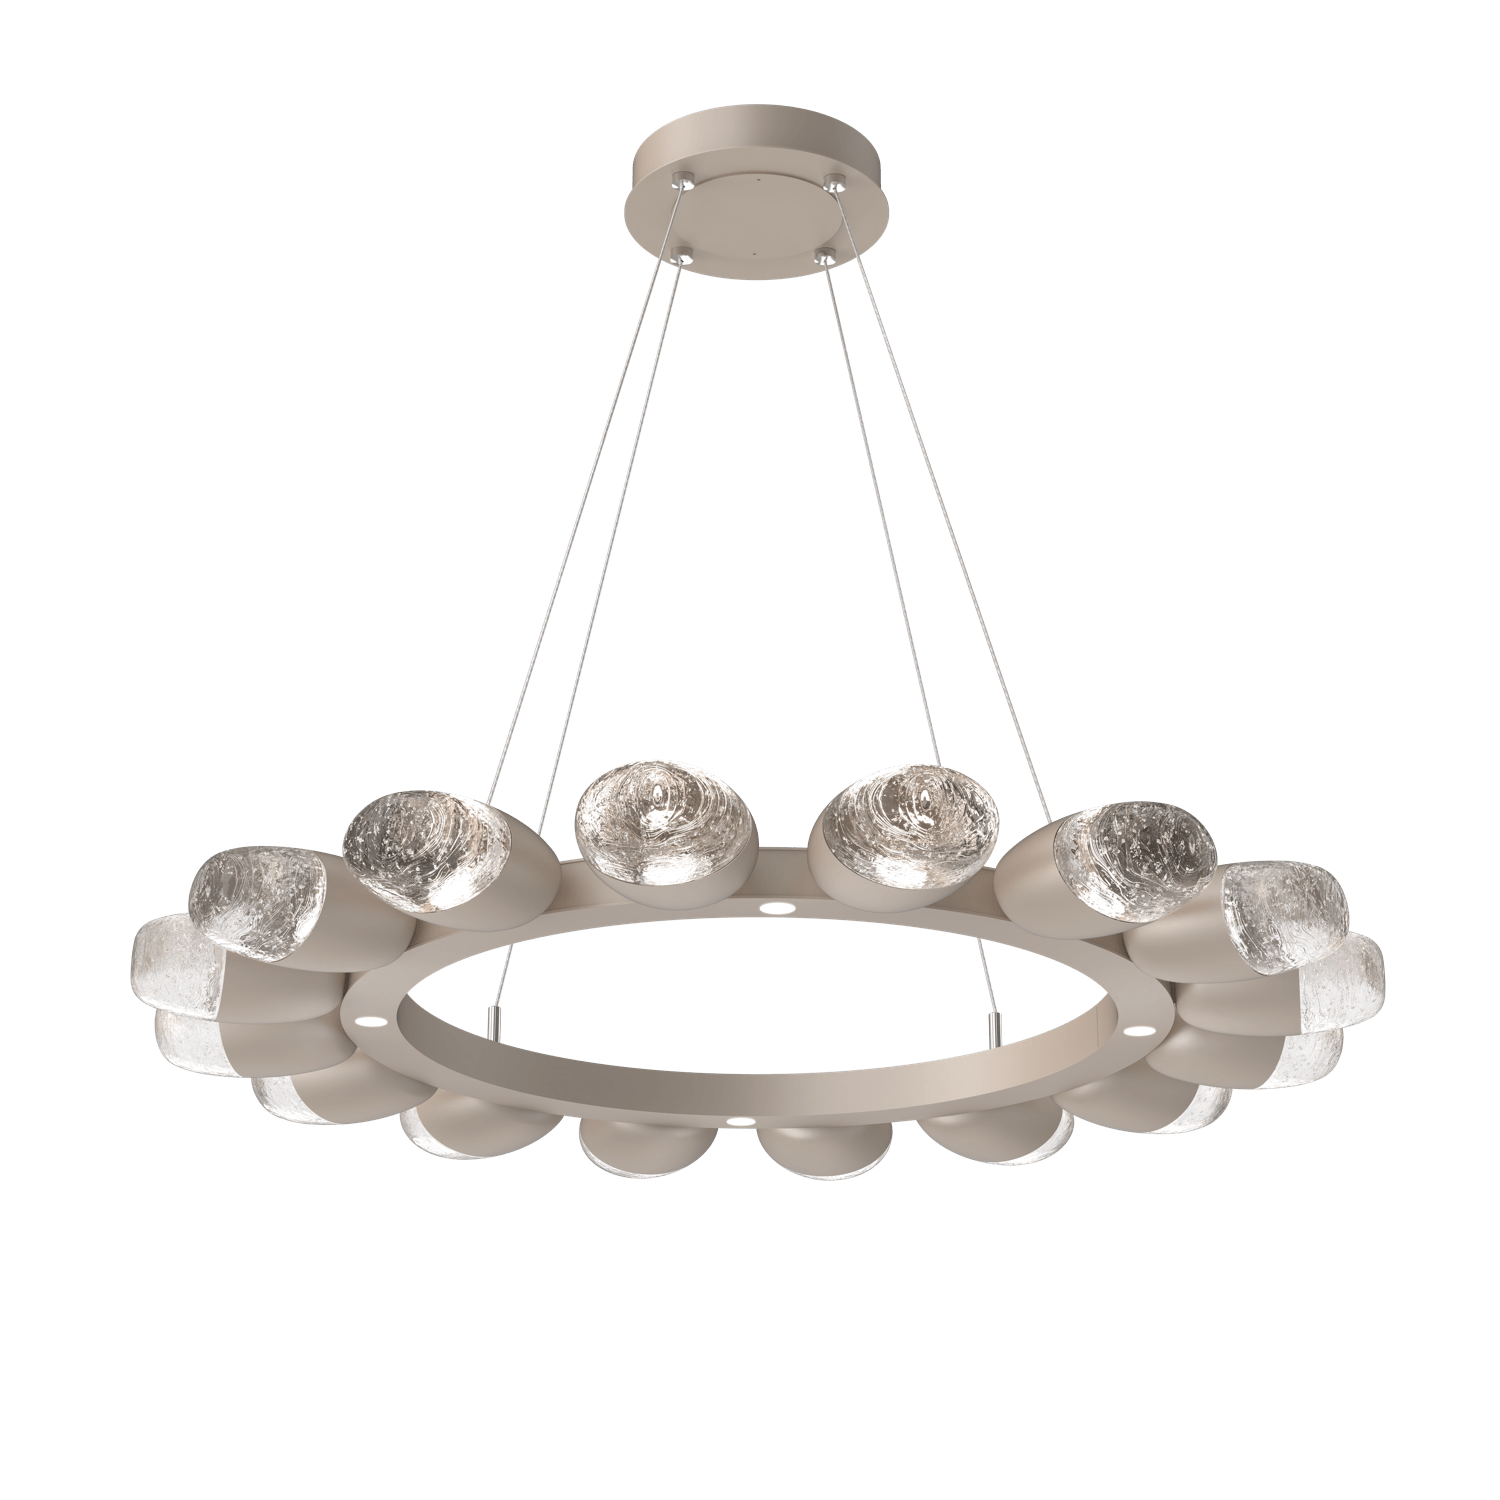 CHB0079-36-BS-Hammerton-Studio-Pebble-36-inch-radial-ring-chandelier-with-metallic-beige-silver-finish-and-clear-cast-glass-shades-and-LED-lamping